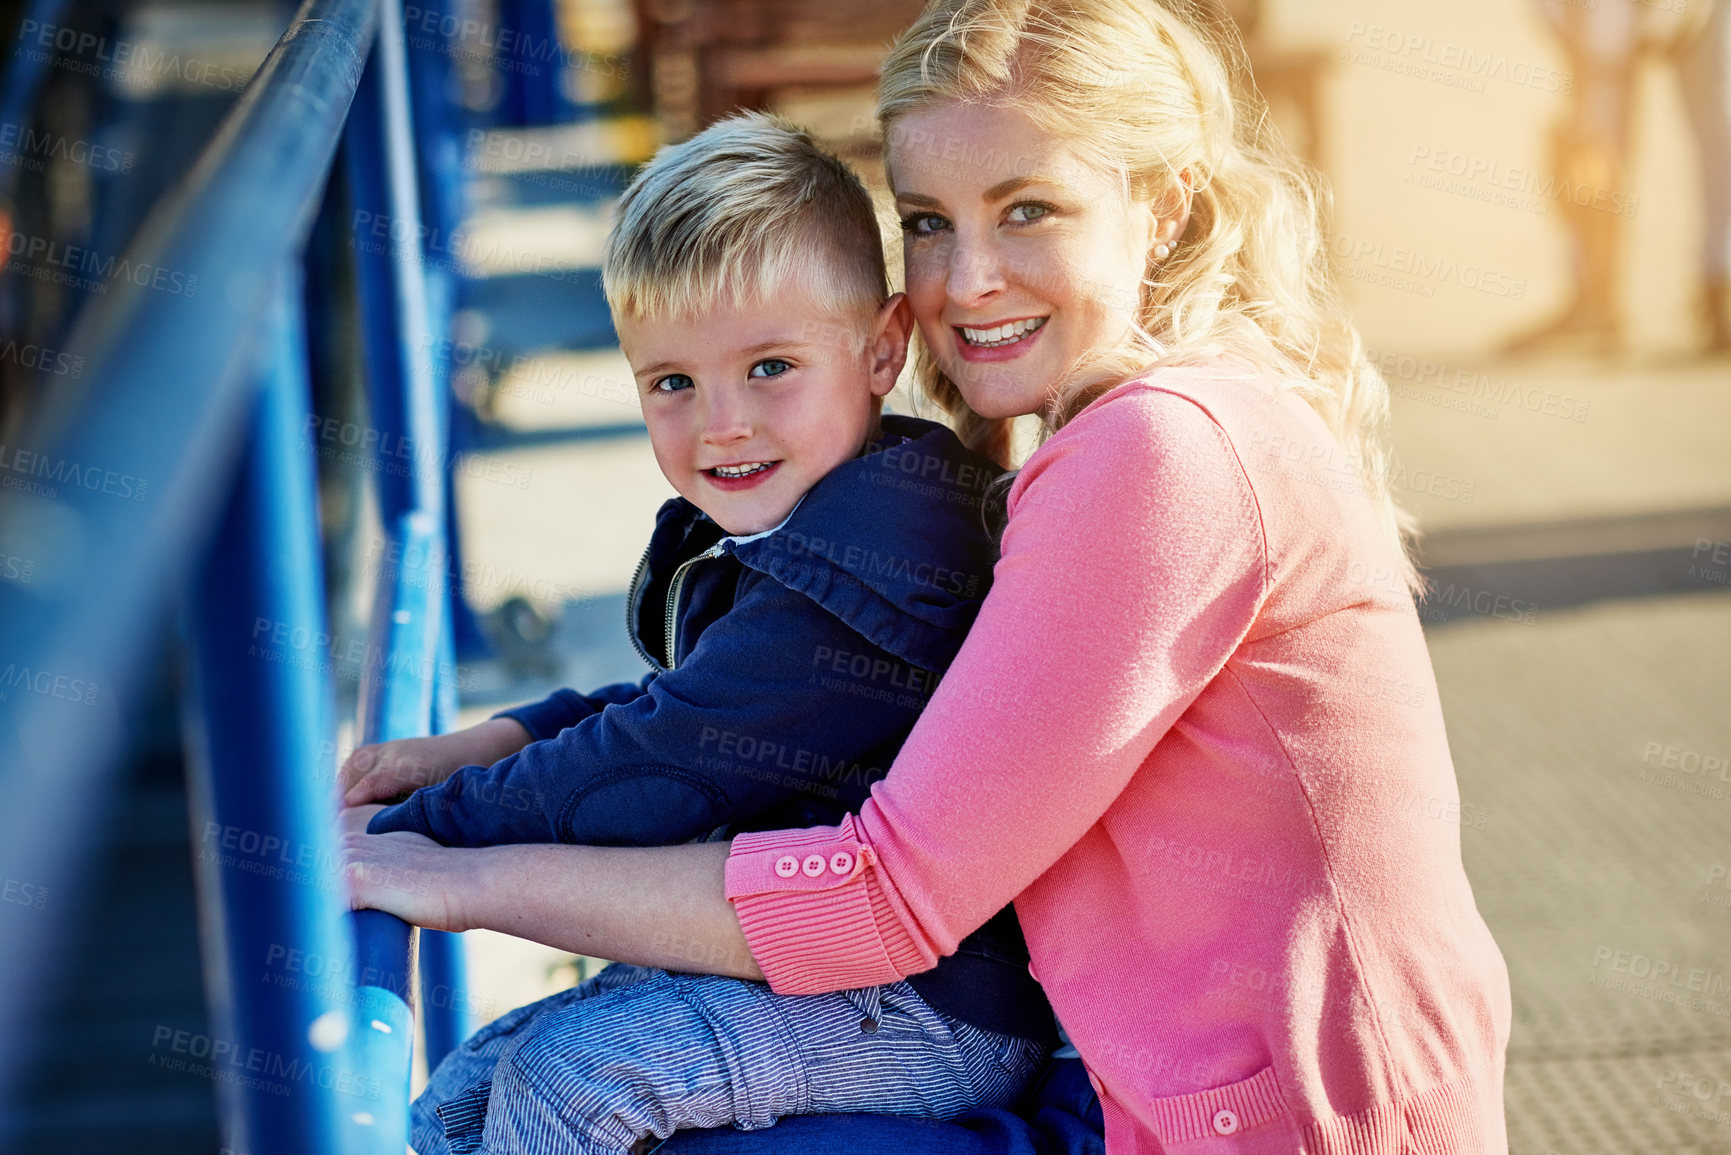 Buy stock photo Portrait of a mother posing with her little boy on her lap while enjoying a day outside